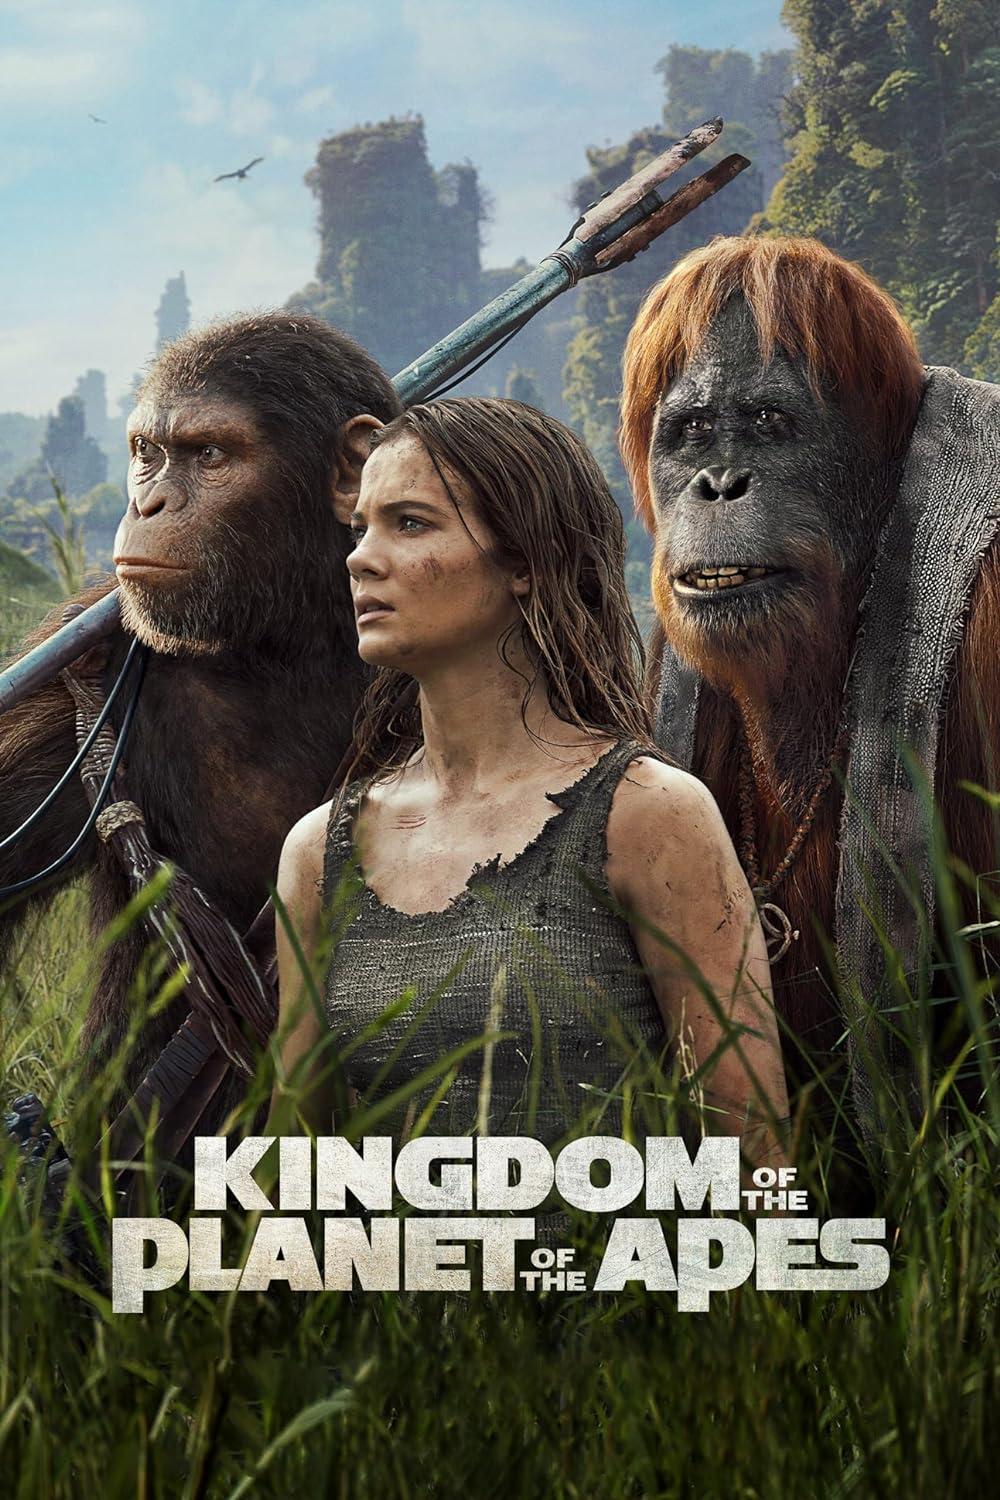 Poster from the Movie "Kingdom of the Planet of the Apes"